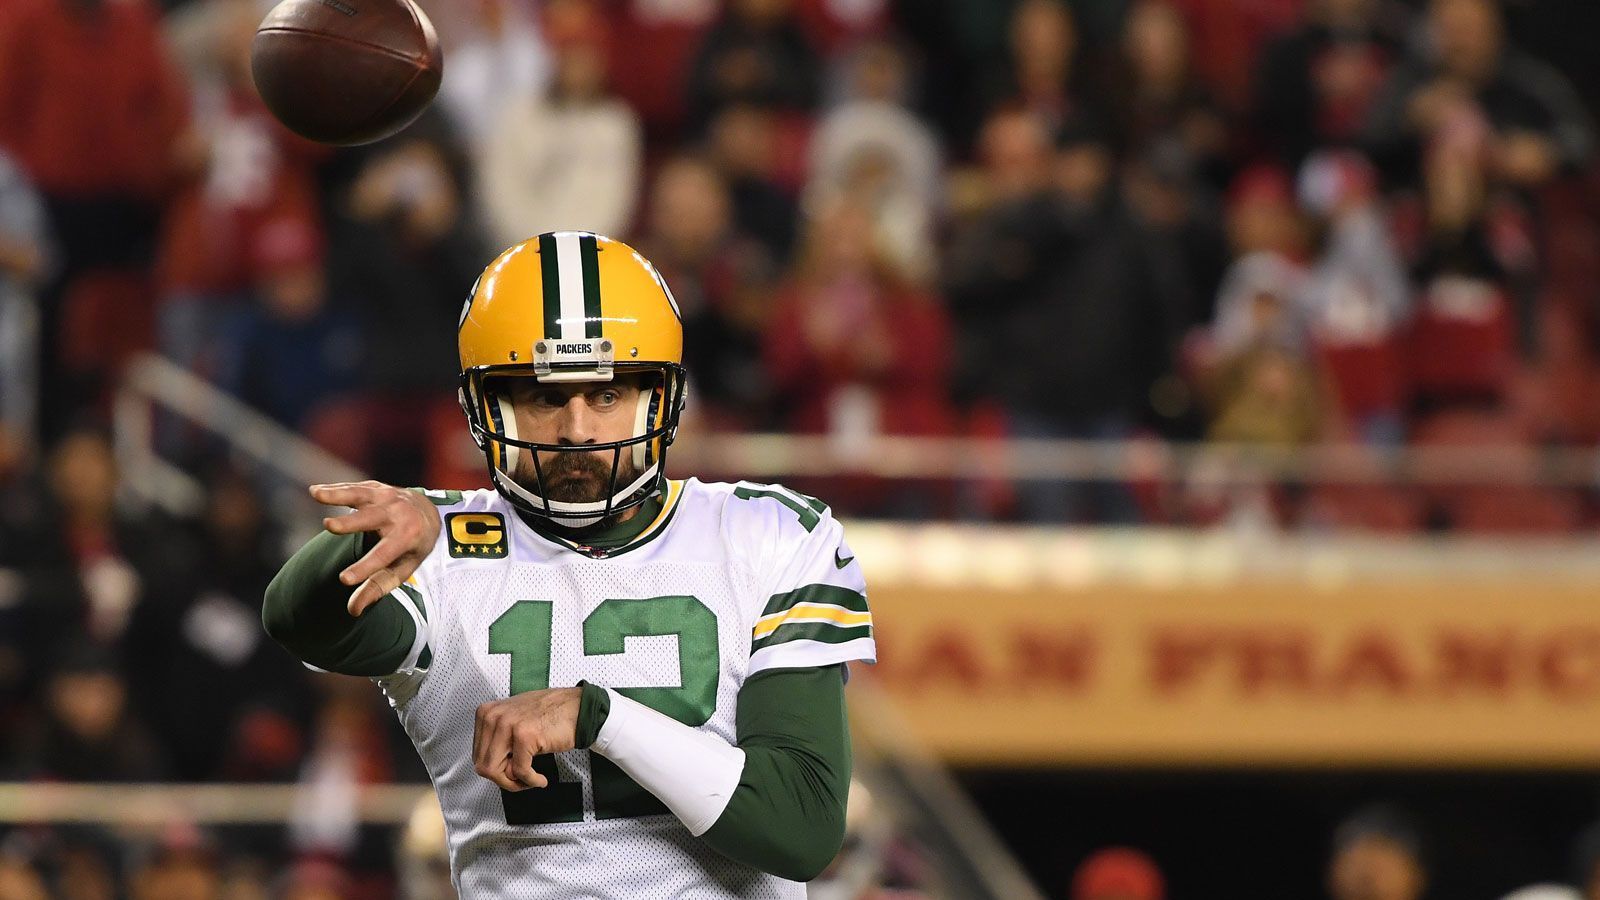 
                <strong>Green Bay Packers: Aaron Rodgers</strong><br>
                Position: QuarterbackIm Team seit: 16 Saisons
              